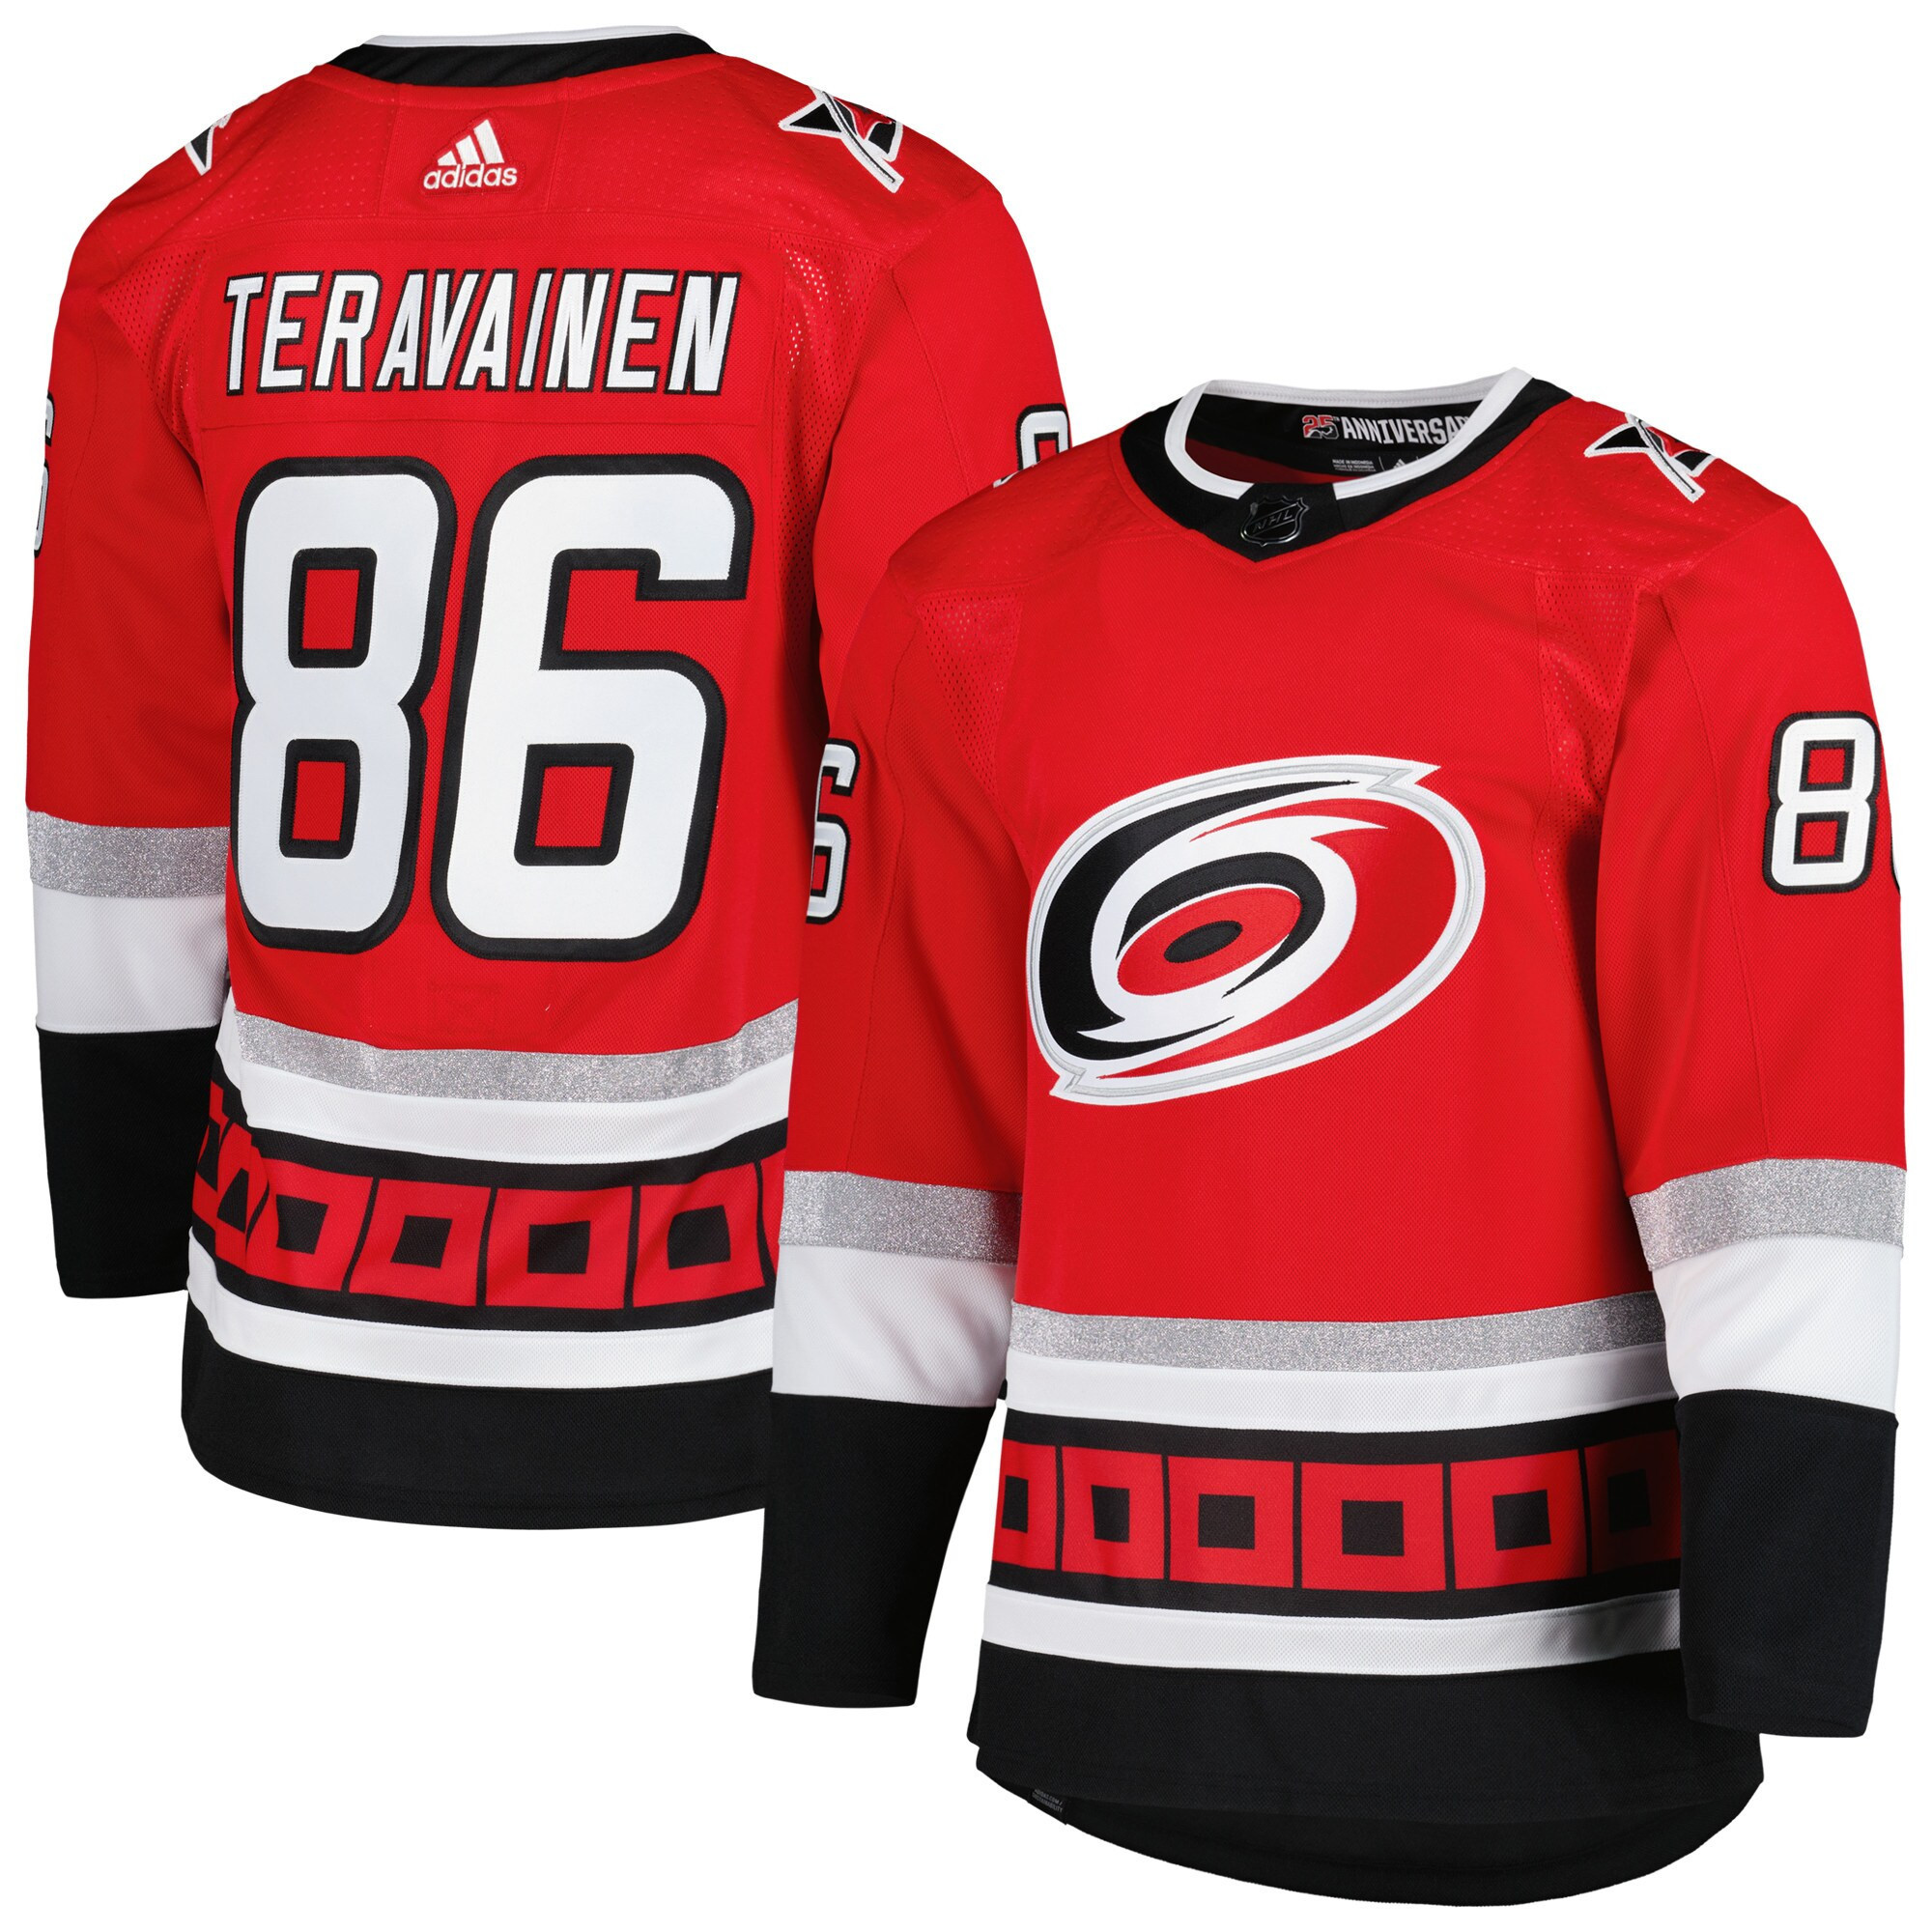 Teuvo Teravainen Carolina Hurricanes Red Jersey - All Stitched